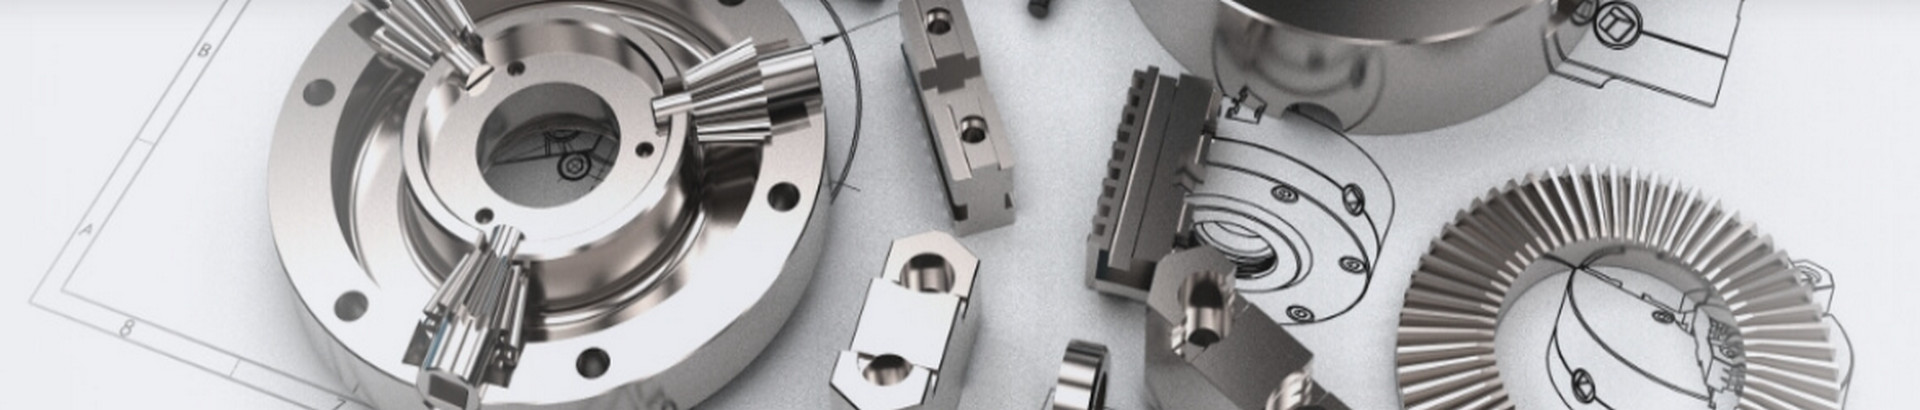 WKPT: Precision, Innovation, and Quality in Precision Machining